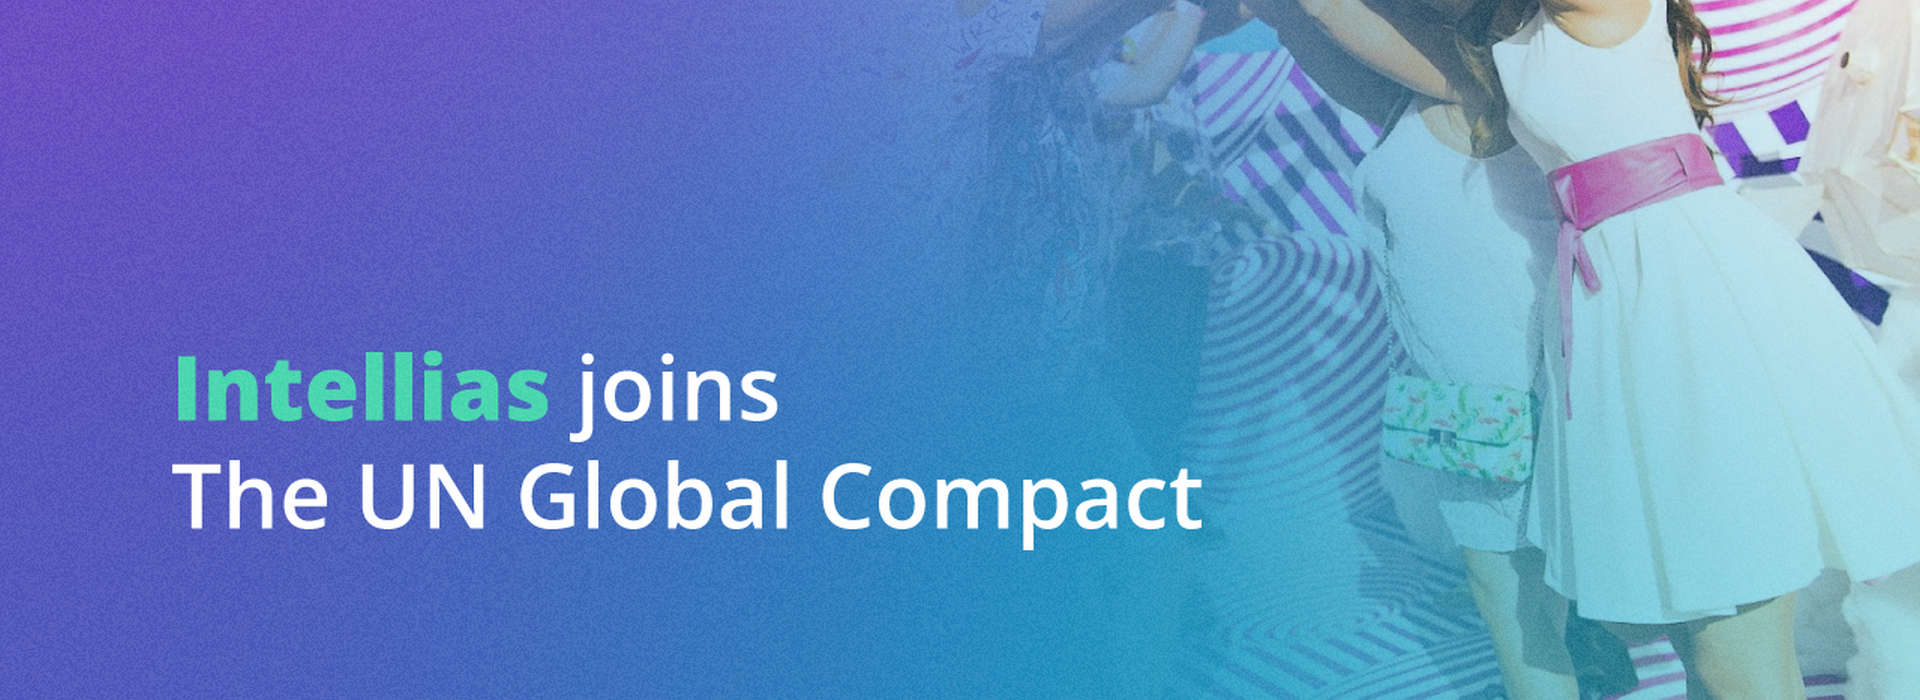 Intellias Joins The UN Global Compact